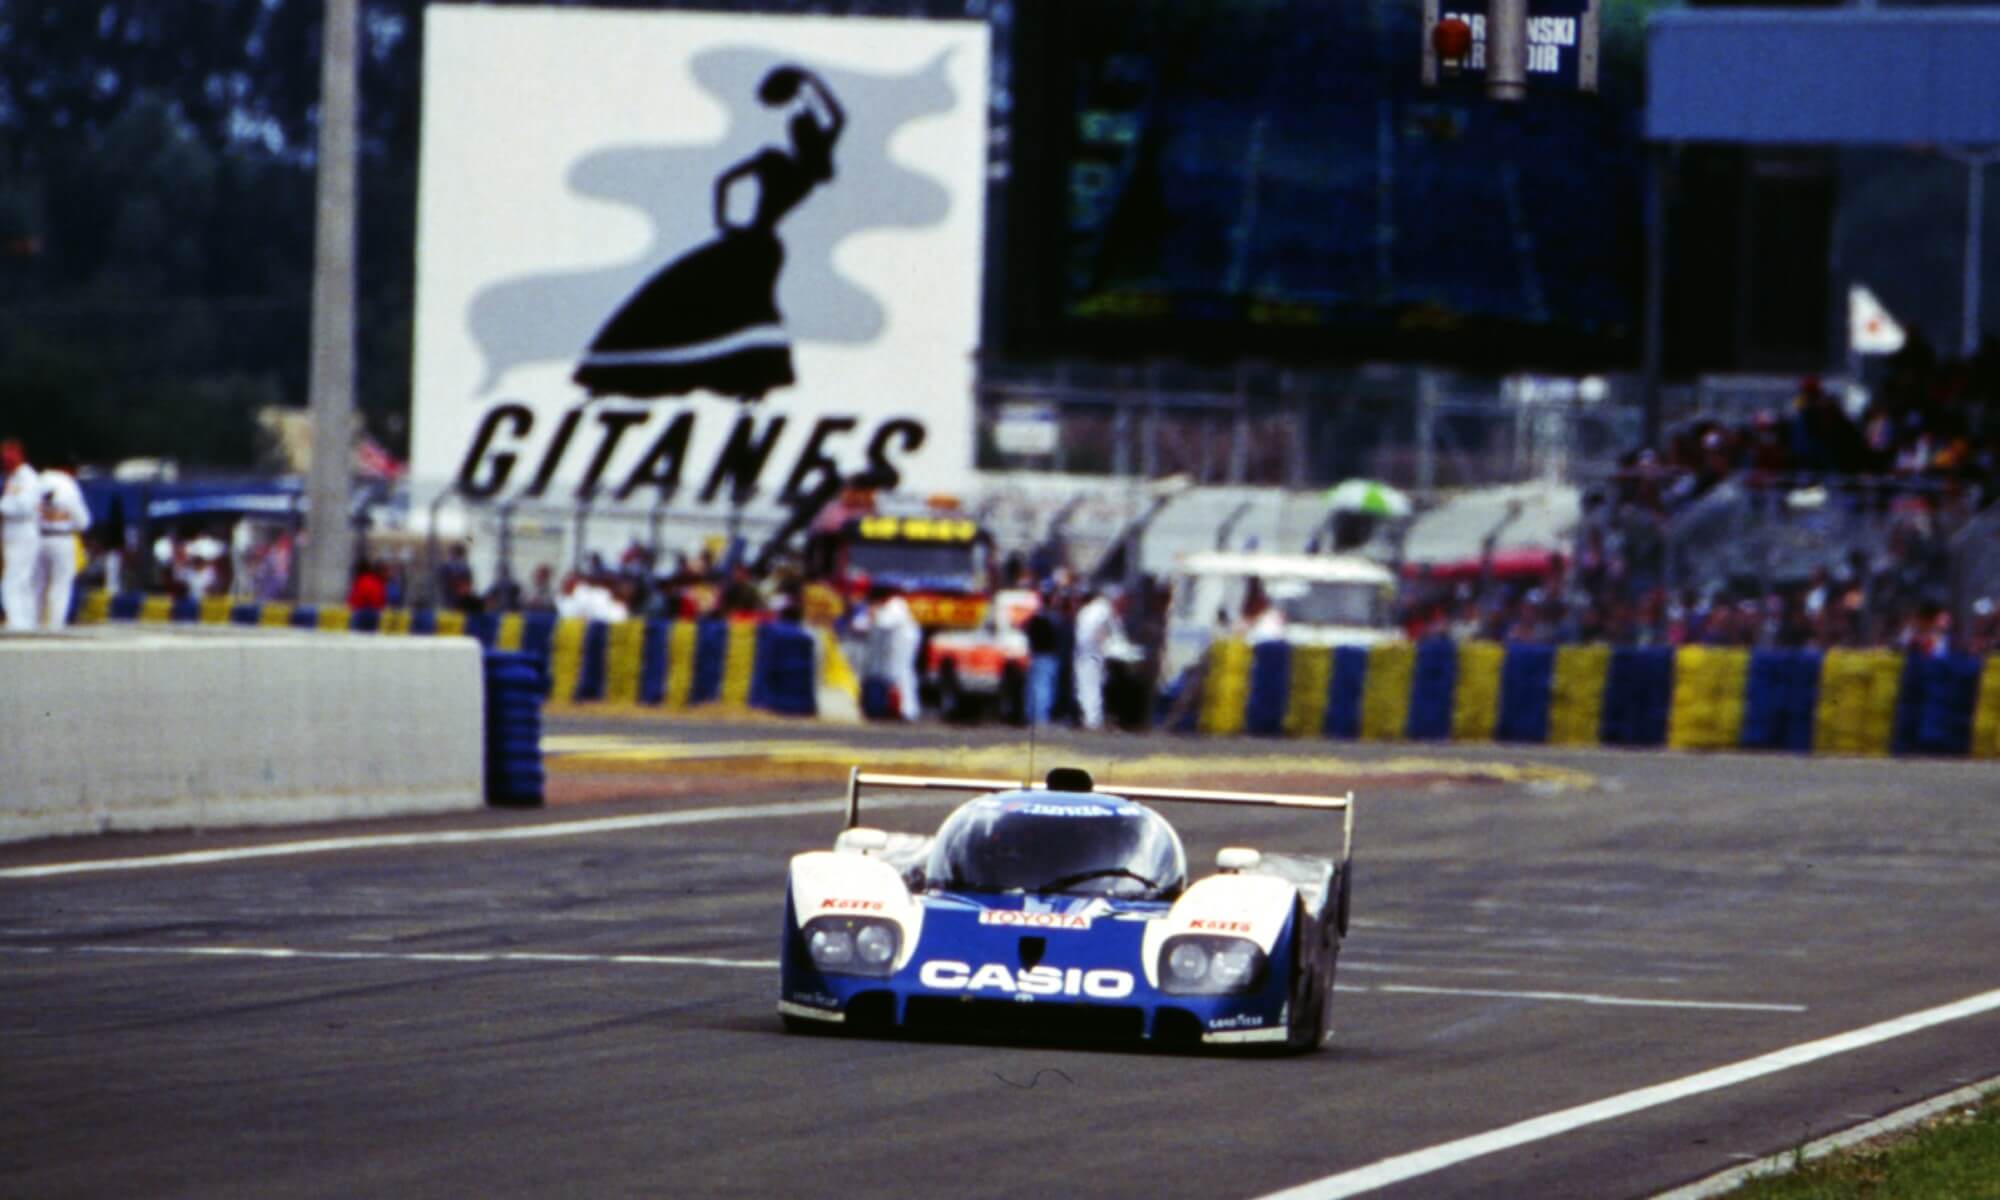 Toyota's history at Le Mans